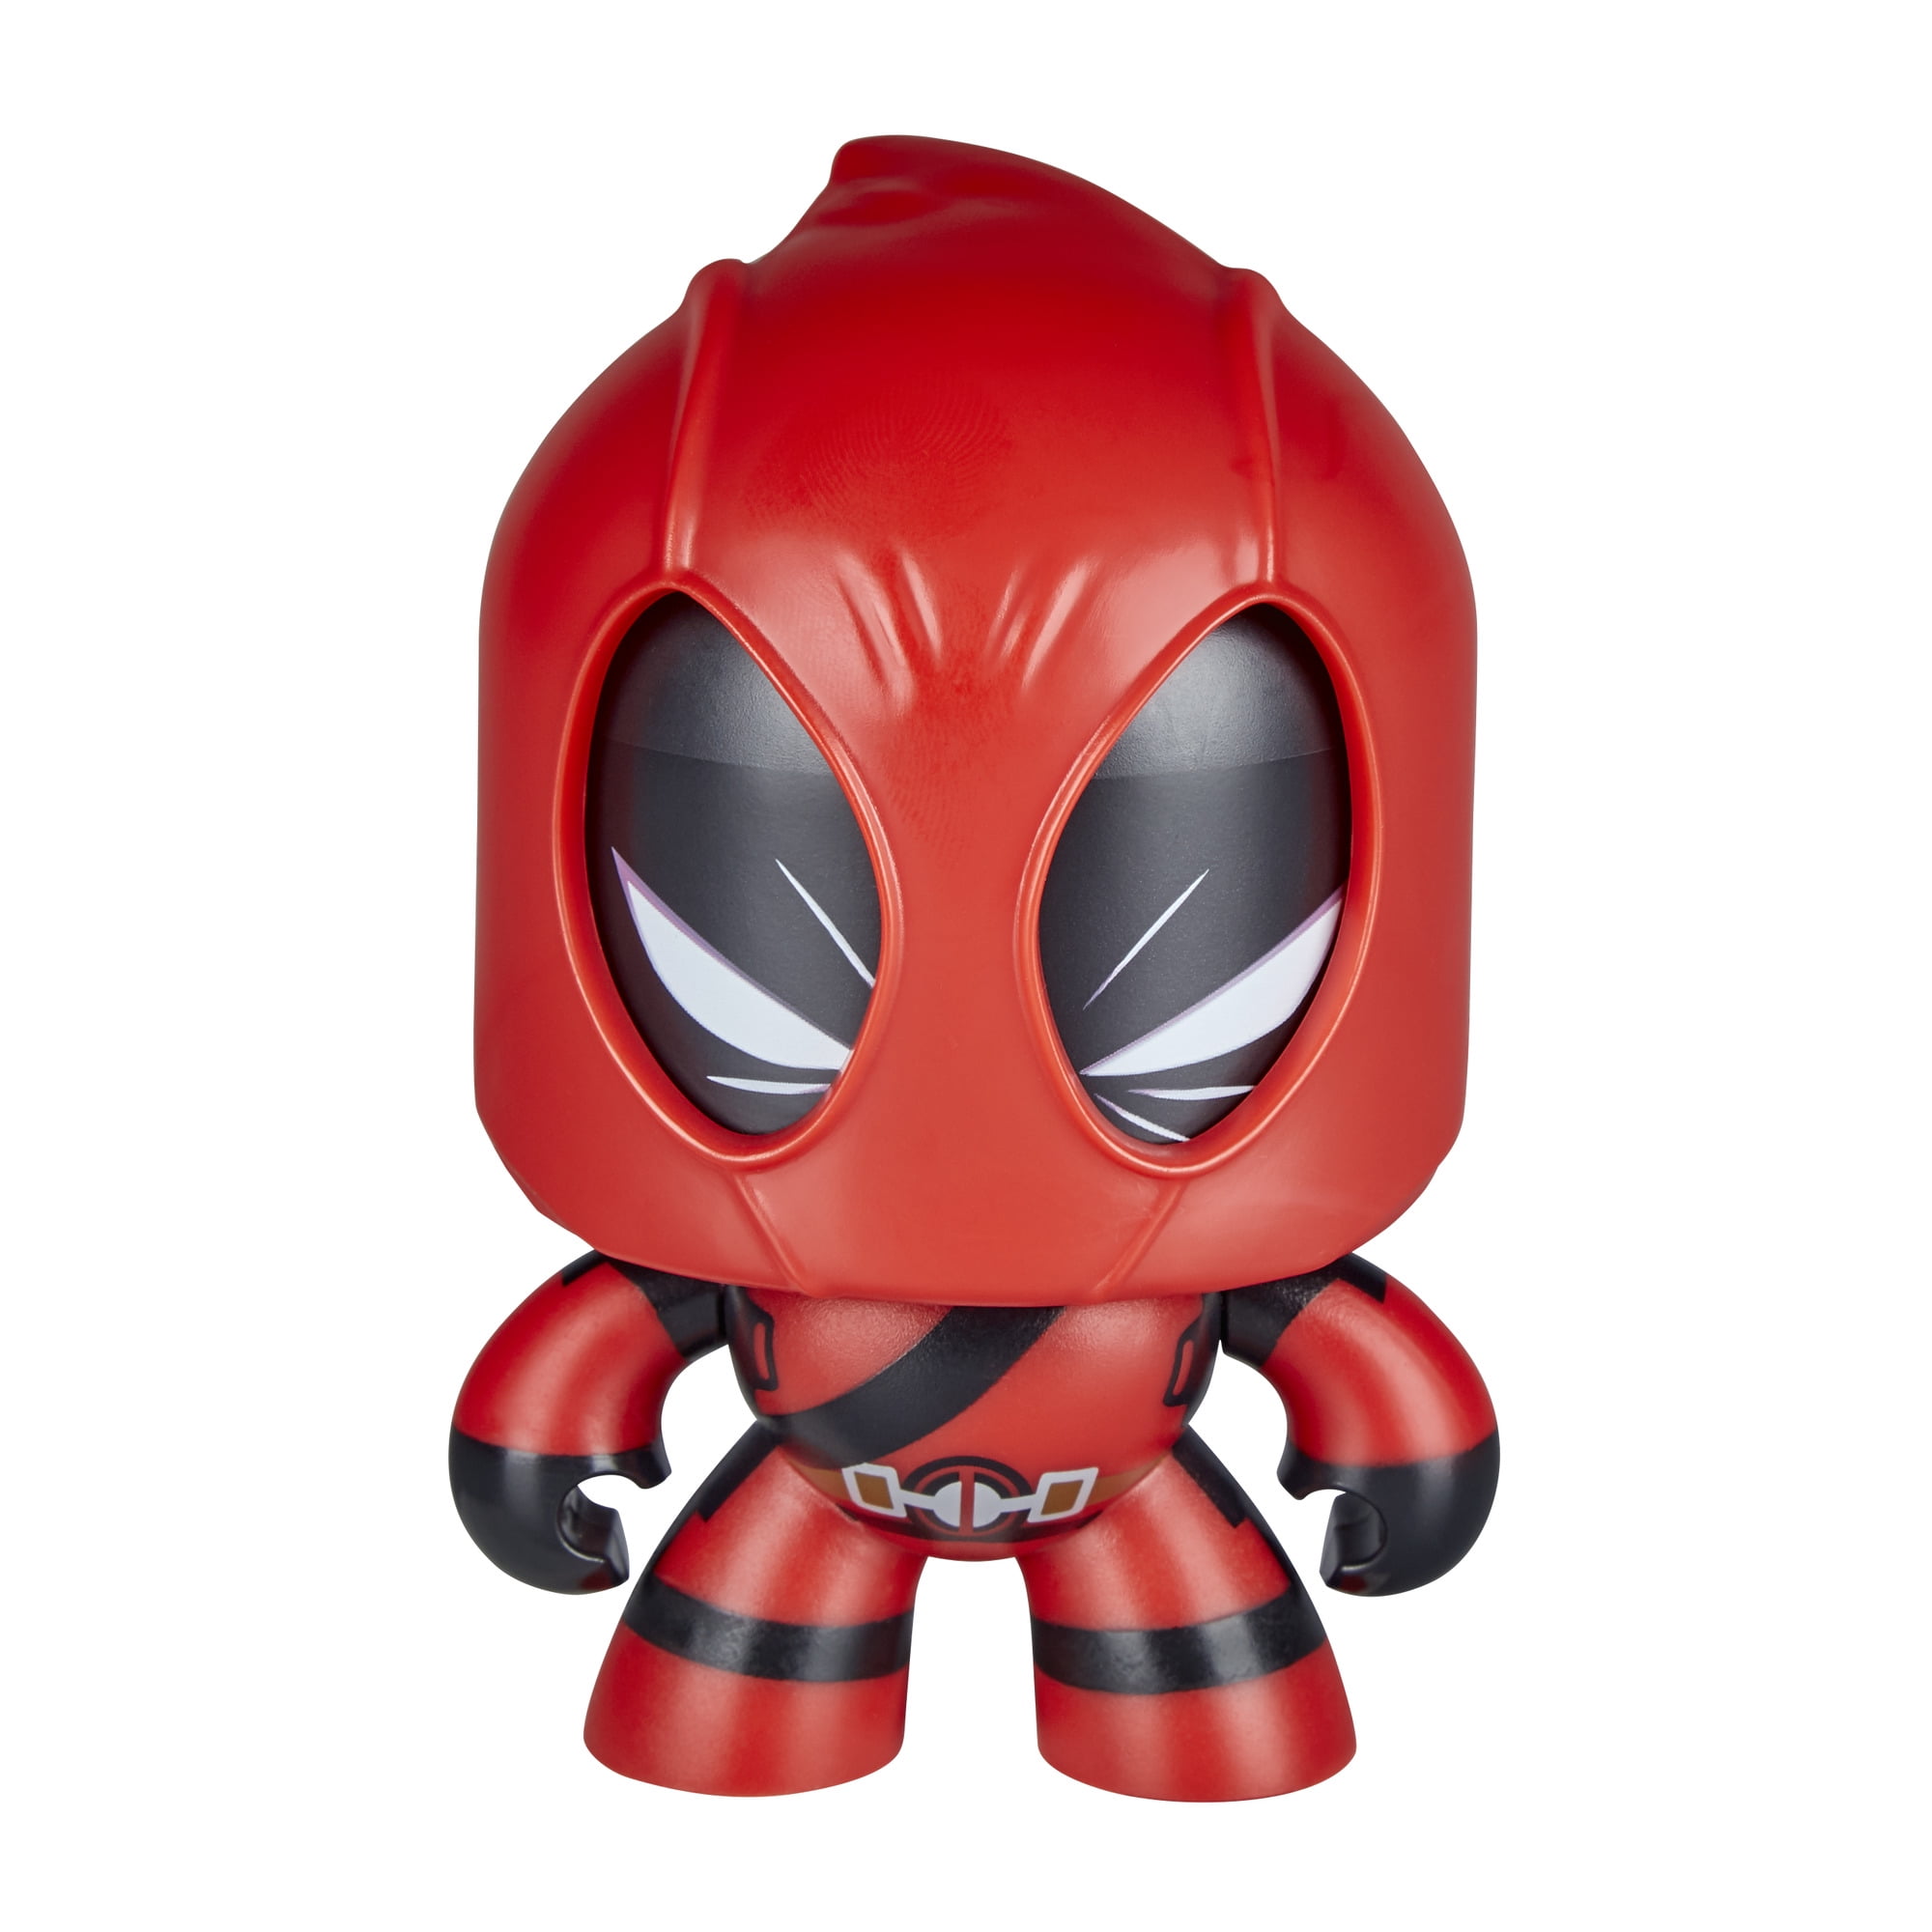 Marvel Mighty Muggs 3.75" Collectible Figure Deadpool #6 